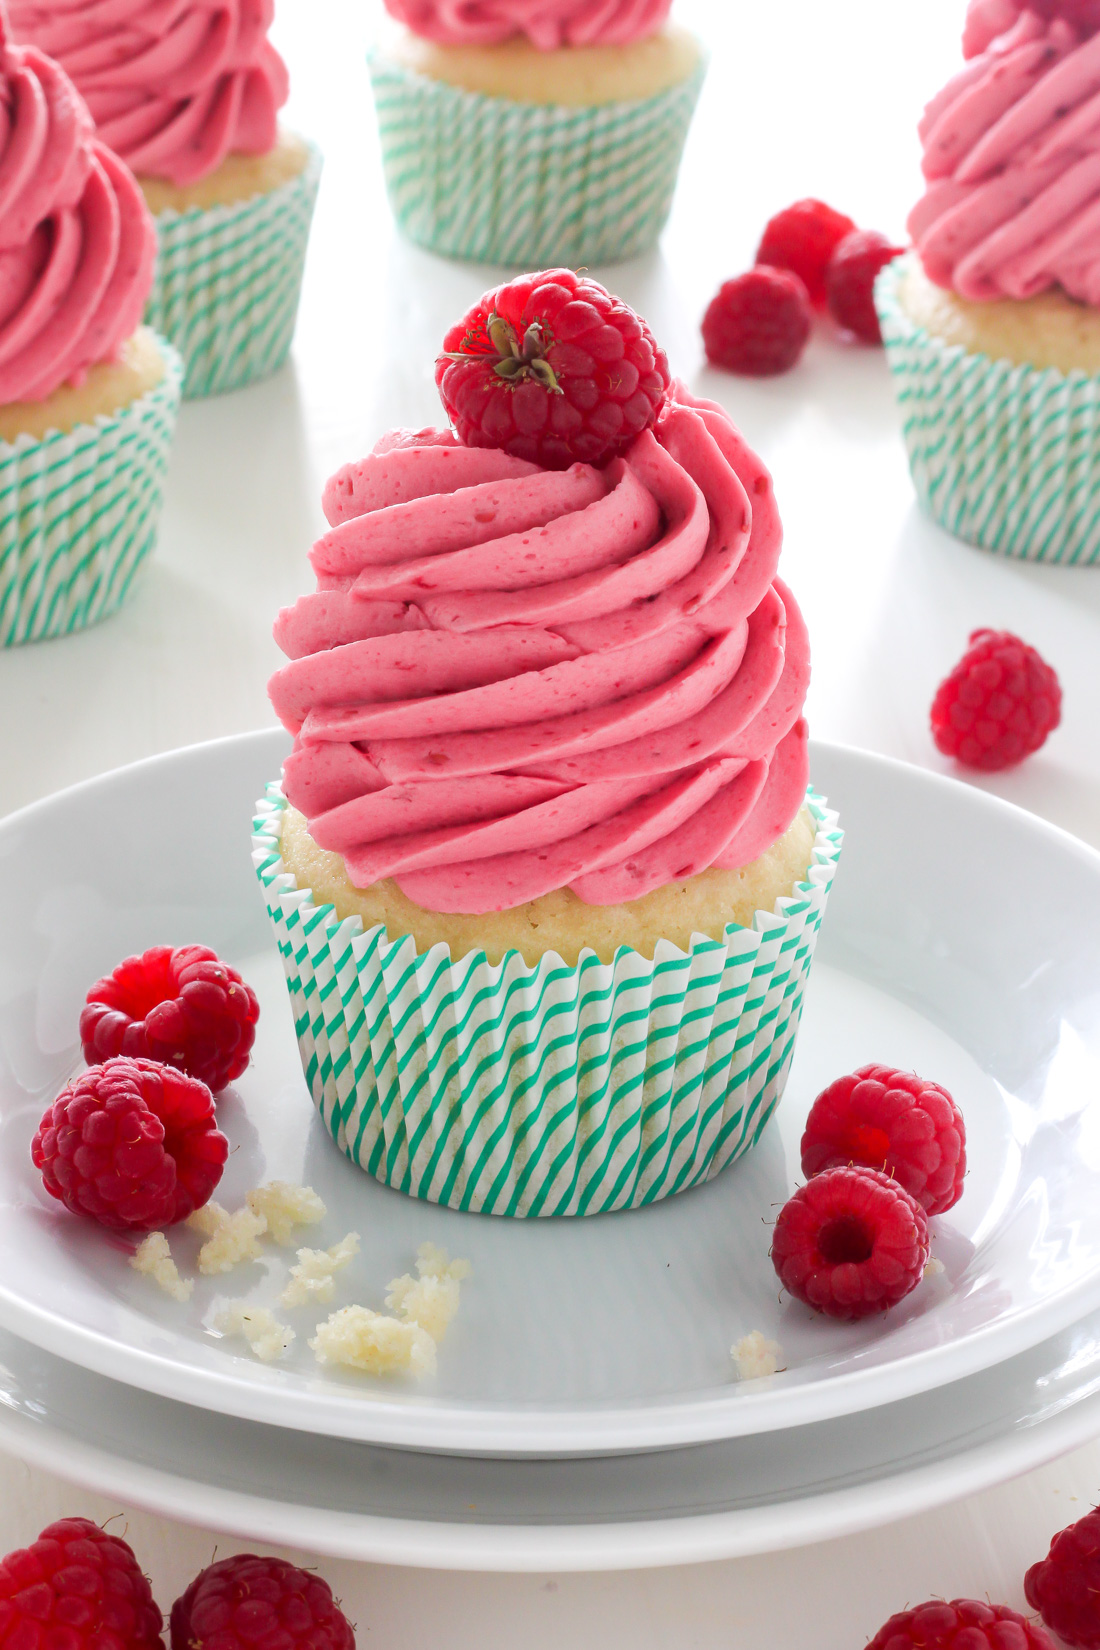 Lemon Cupcakes with Raspberry Buttercream - Baker by Nature